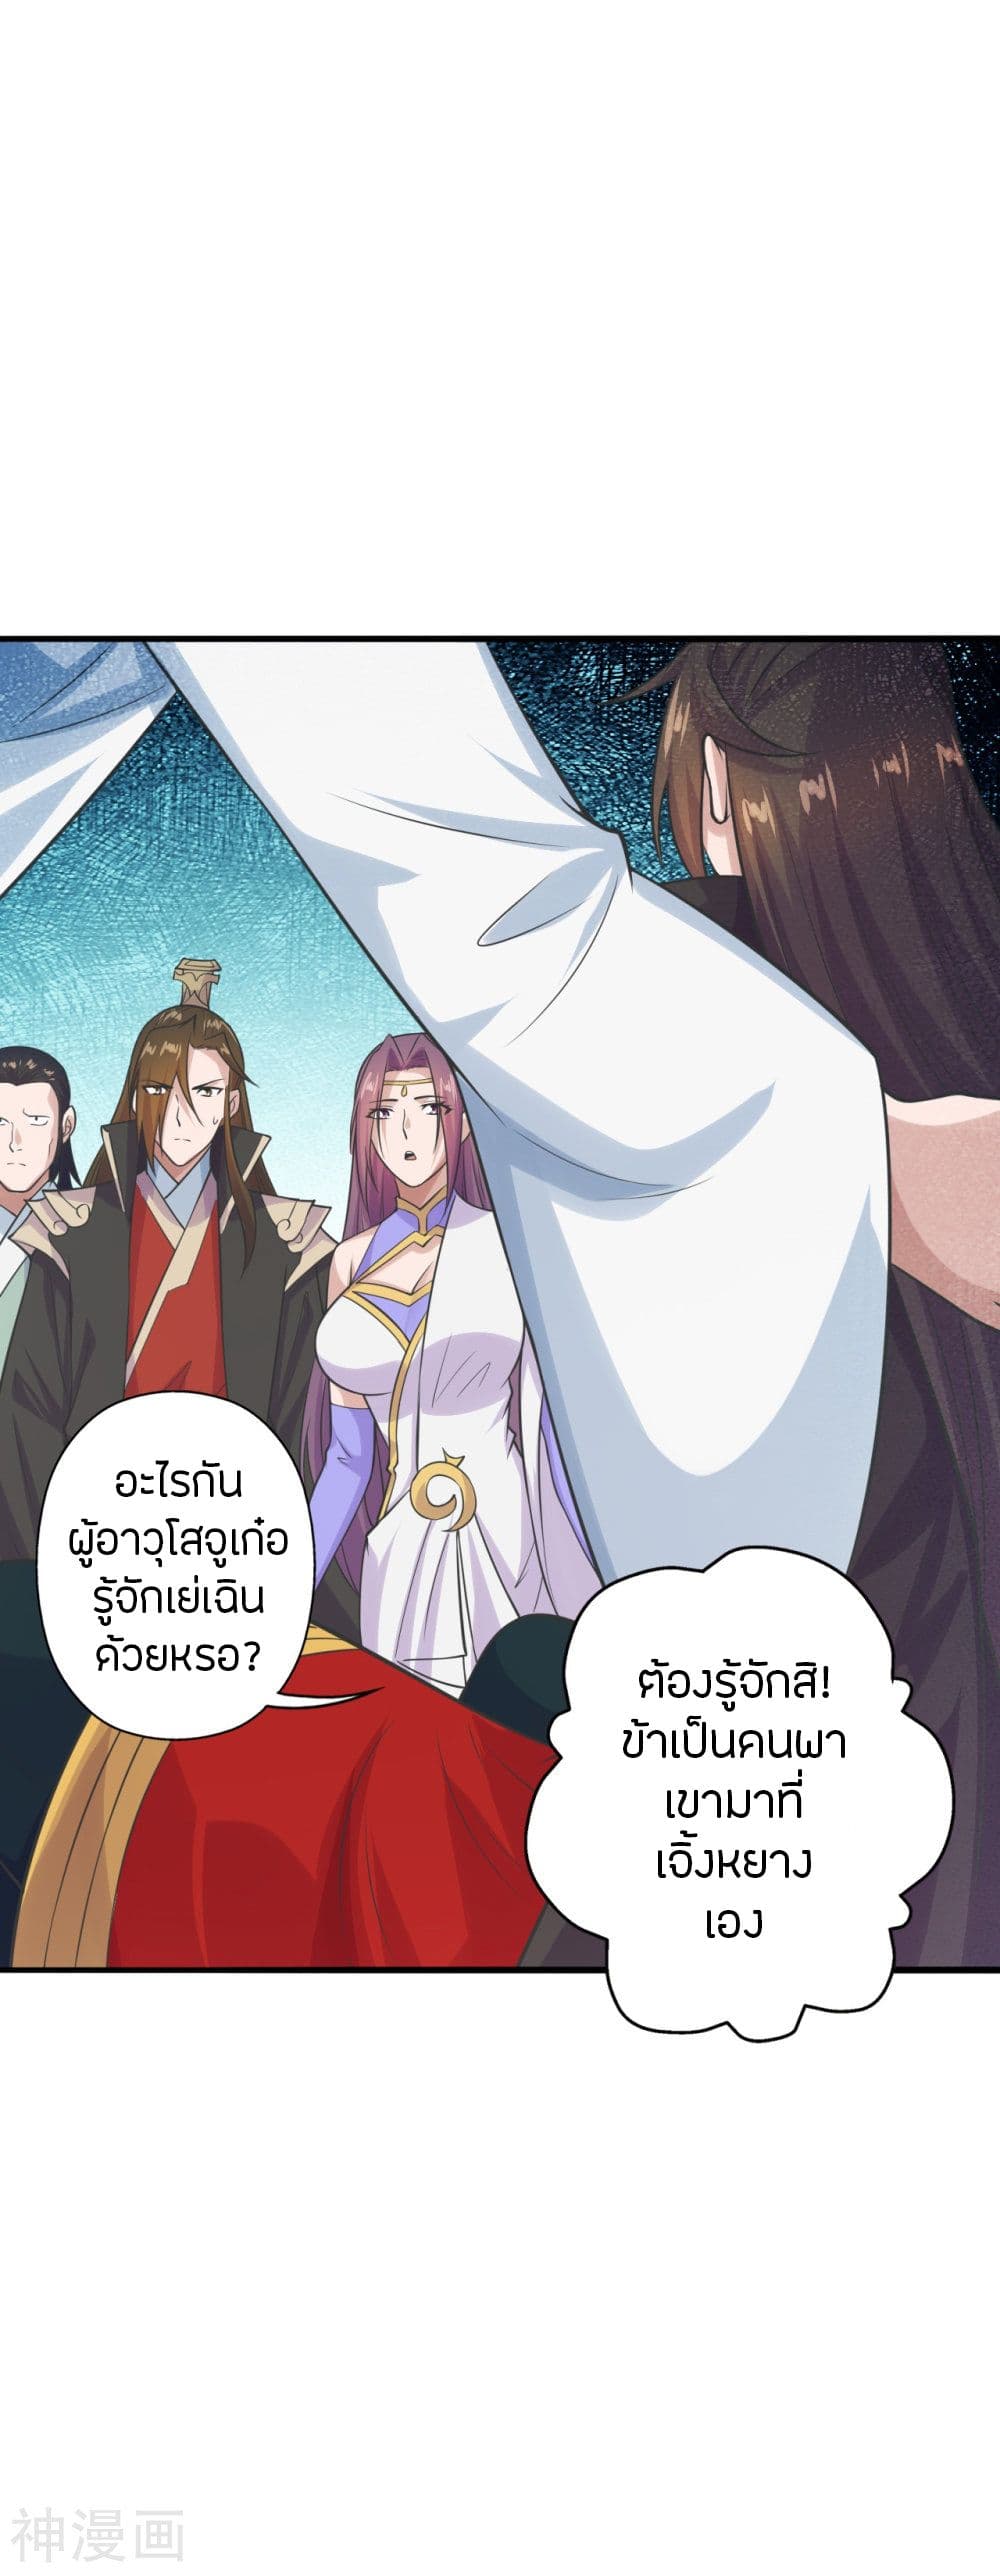 Banished Disciple's Counterattack เธเธฑเธเธฃเธเธฃเธฃเธ”เธดเน€เธเธตเธขเธเธขเธธเธ—เธ 239 (8)